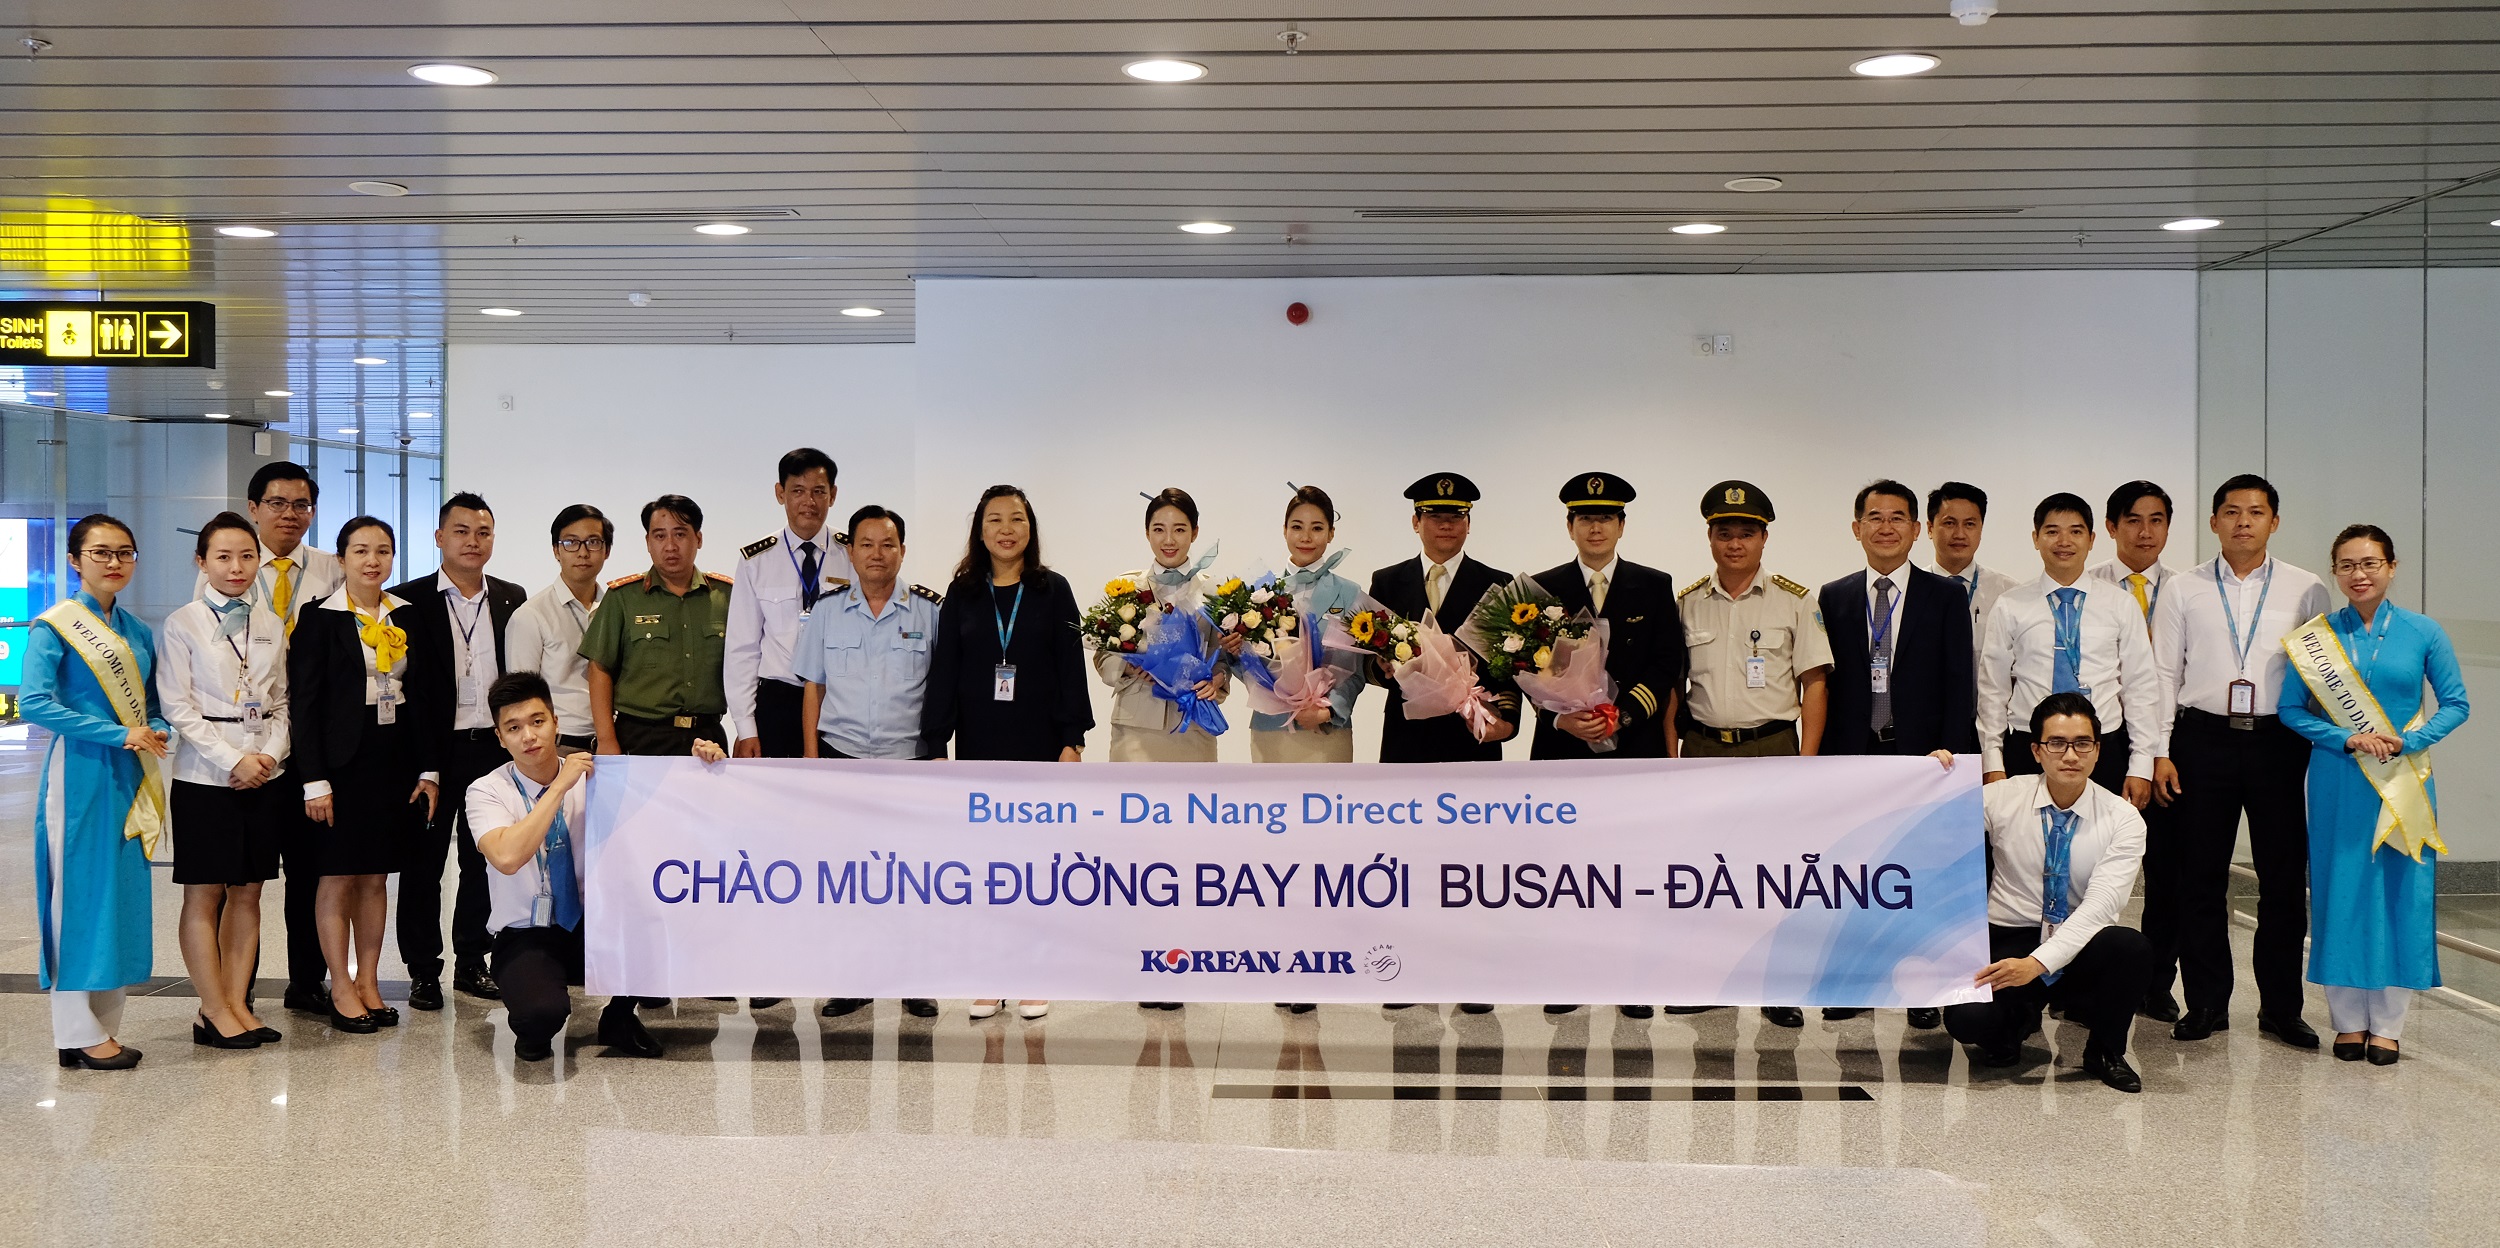 Korean Air held an event to celebrate the inaugural flight from Busan to Danang on 29 October at Danang International Airport. Click to enlarge.